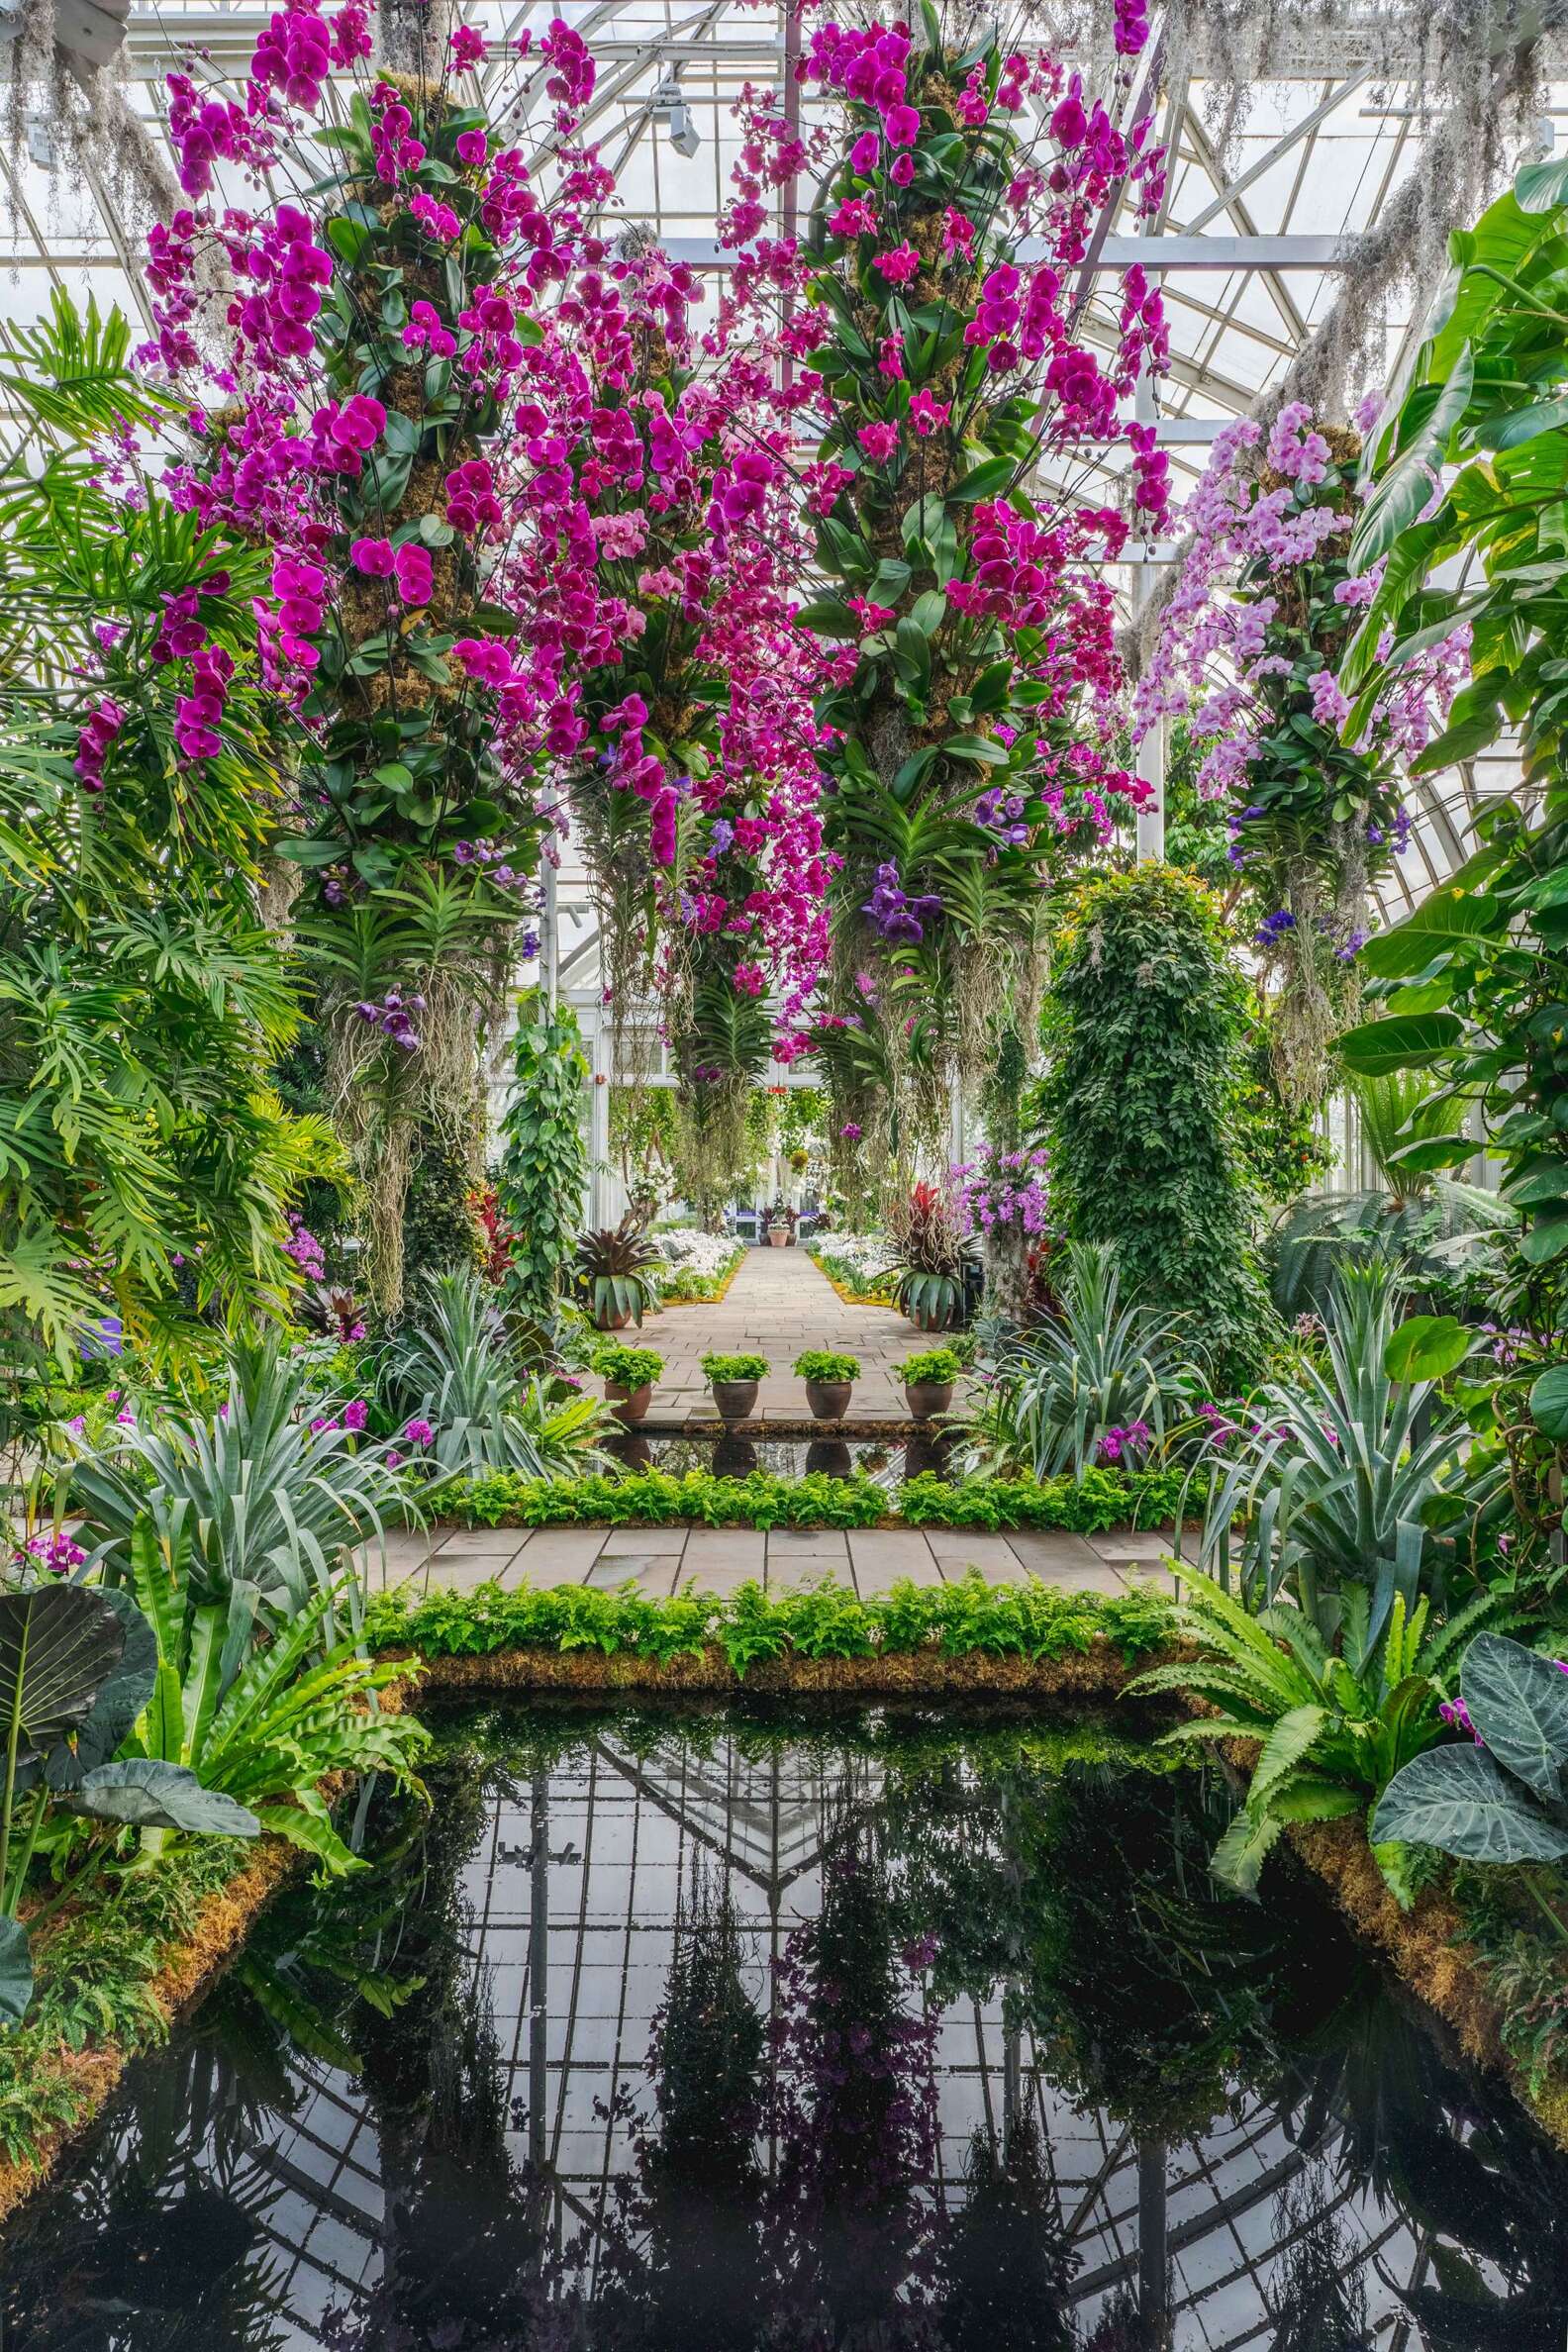 New York Botanical Garden Orchid Show Opens With Thousands of Flowers